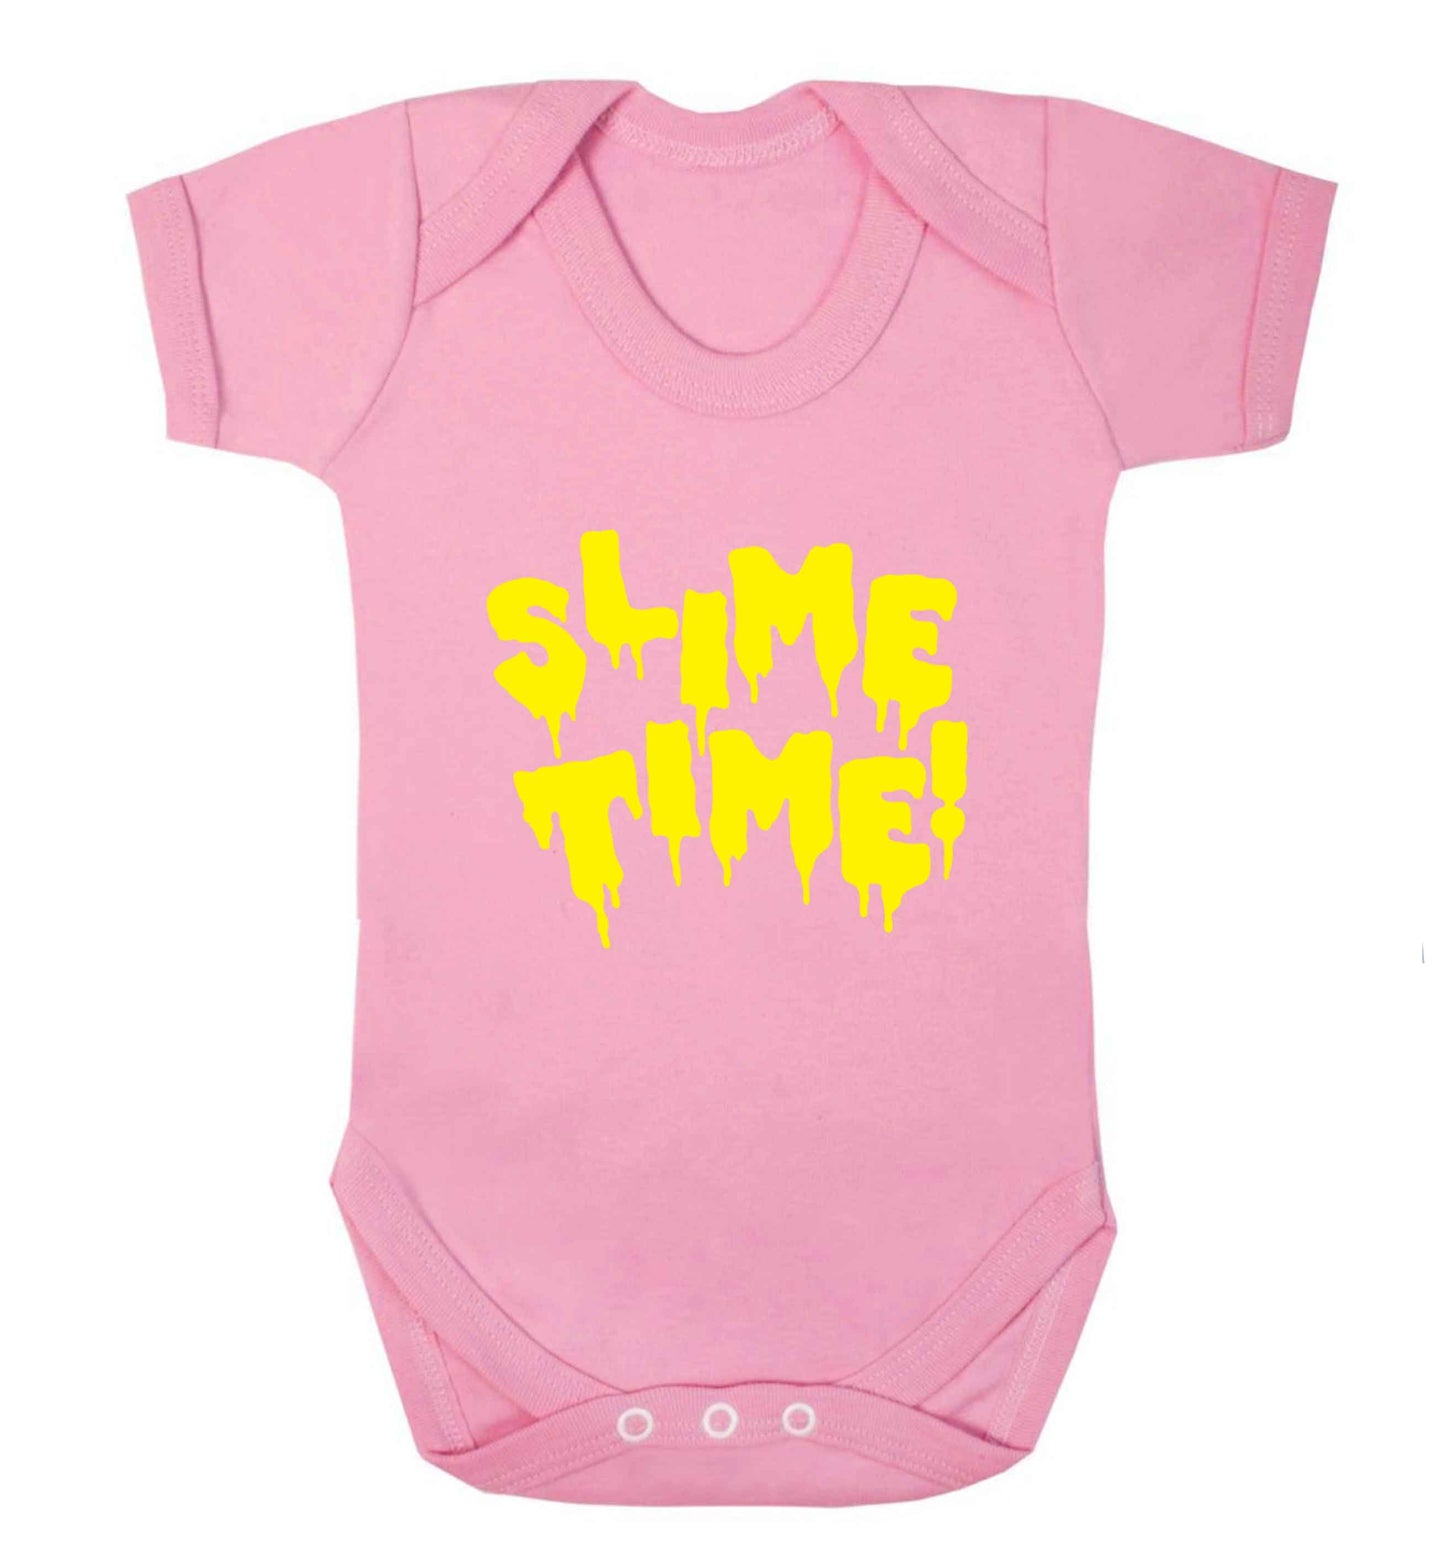 Neon yellow slime time baby vest pale pink 18-24 months